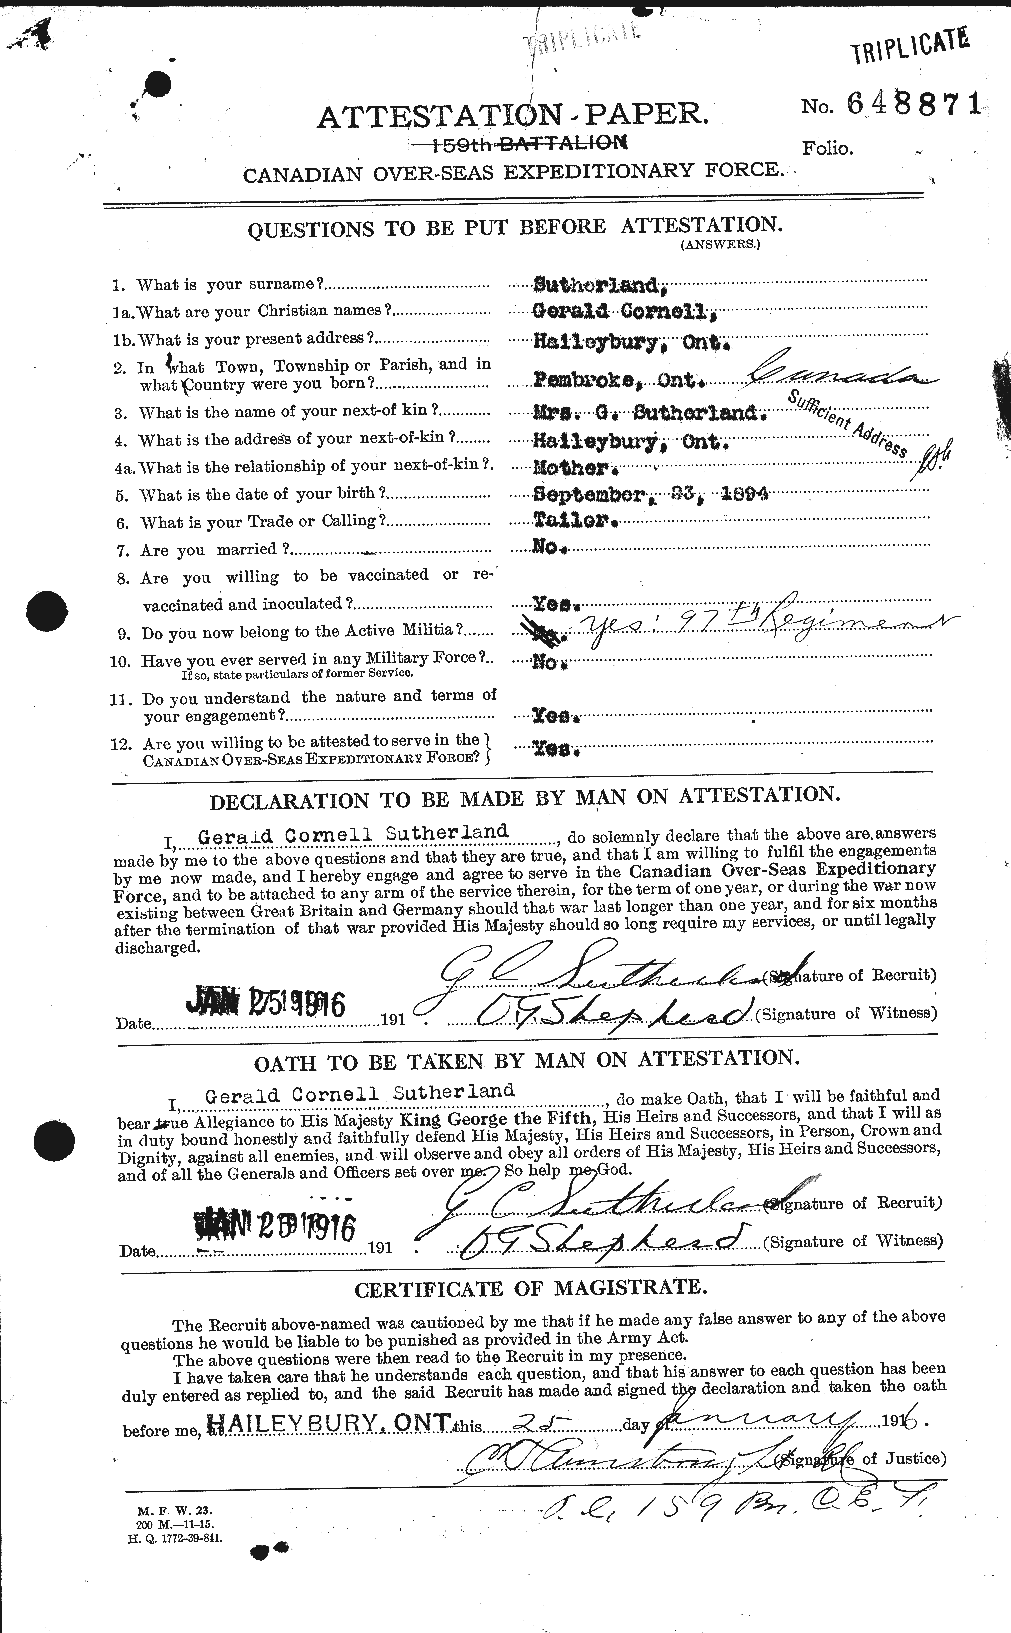 Personnel Records of the First World War - CEF 124837a